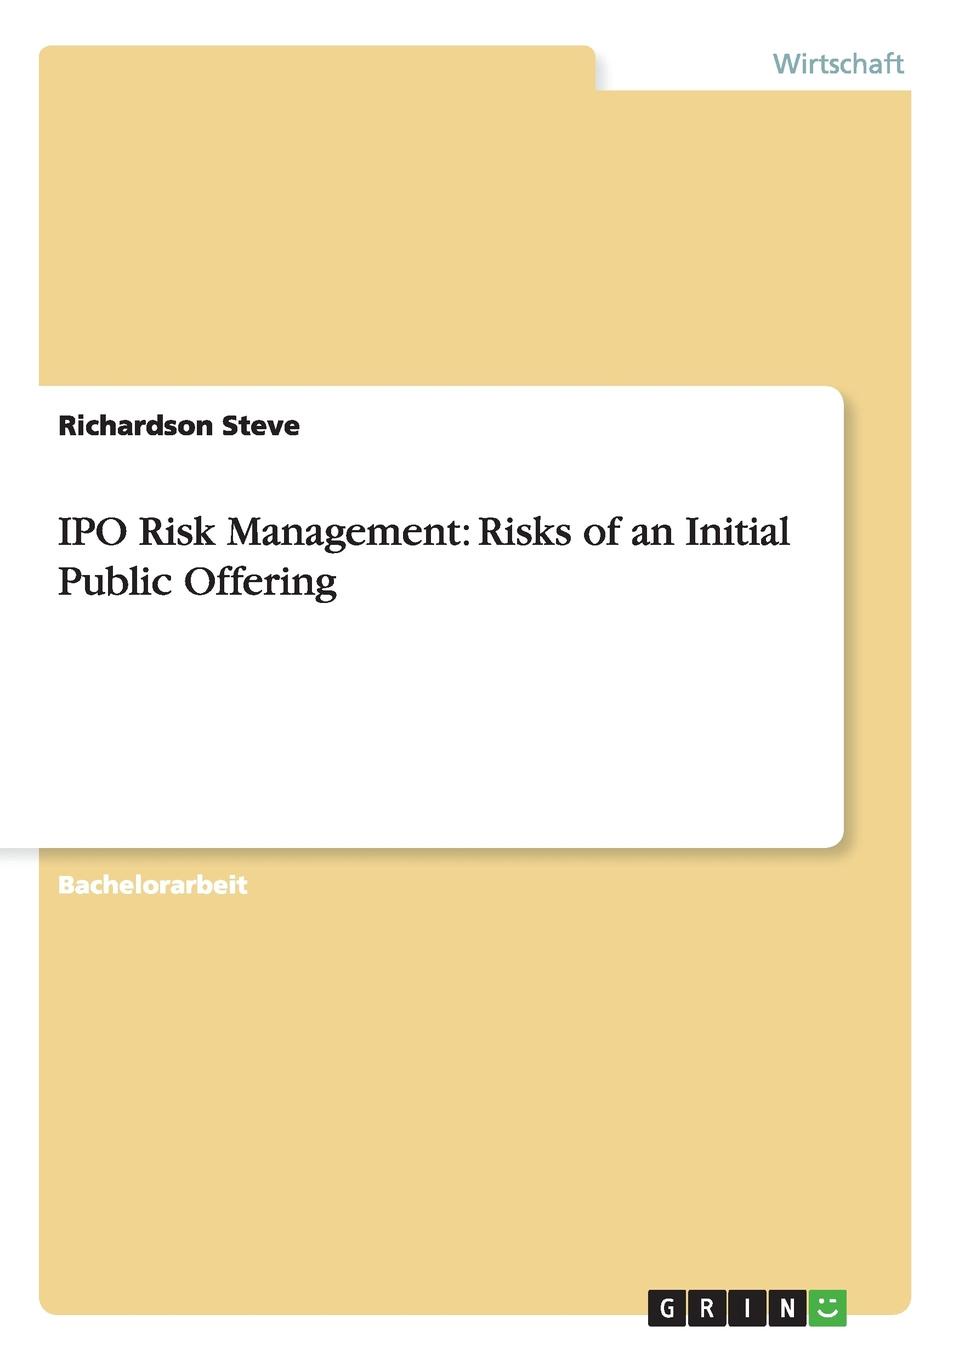 IPO Risk Management. Risks of an Initial Public Offering